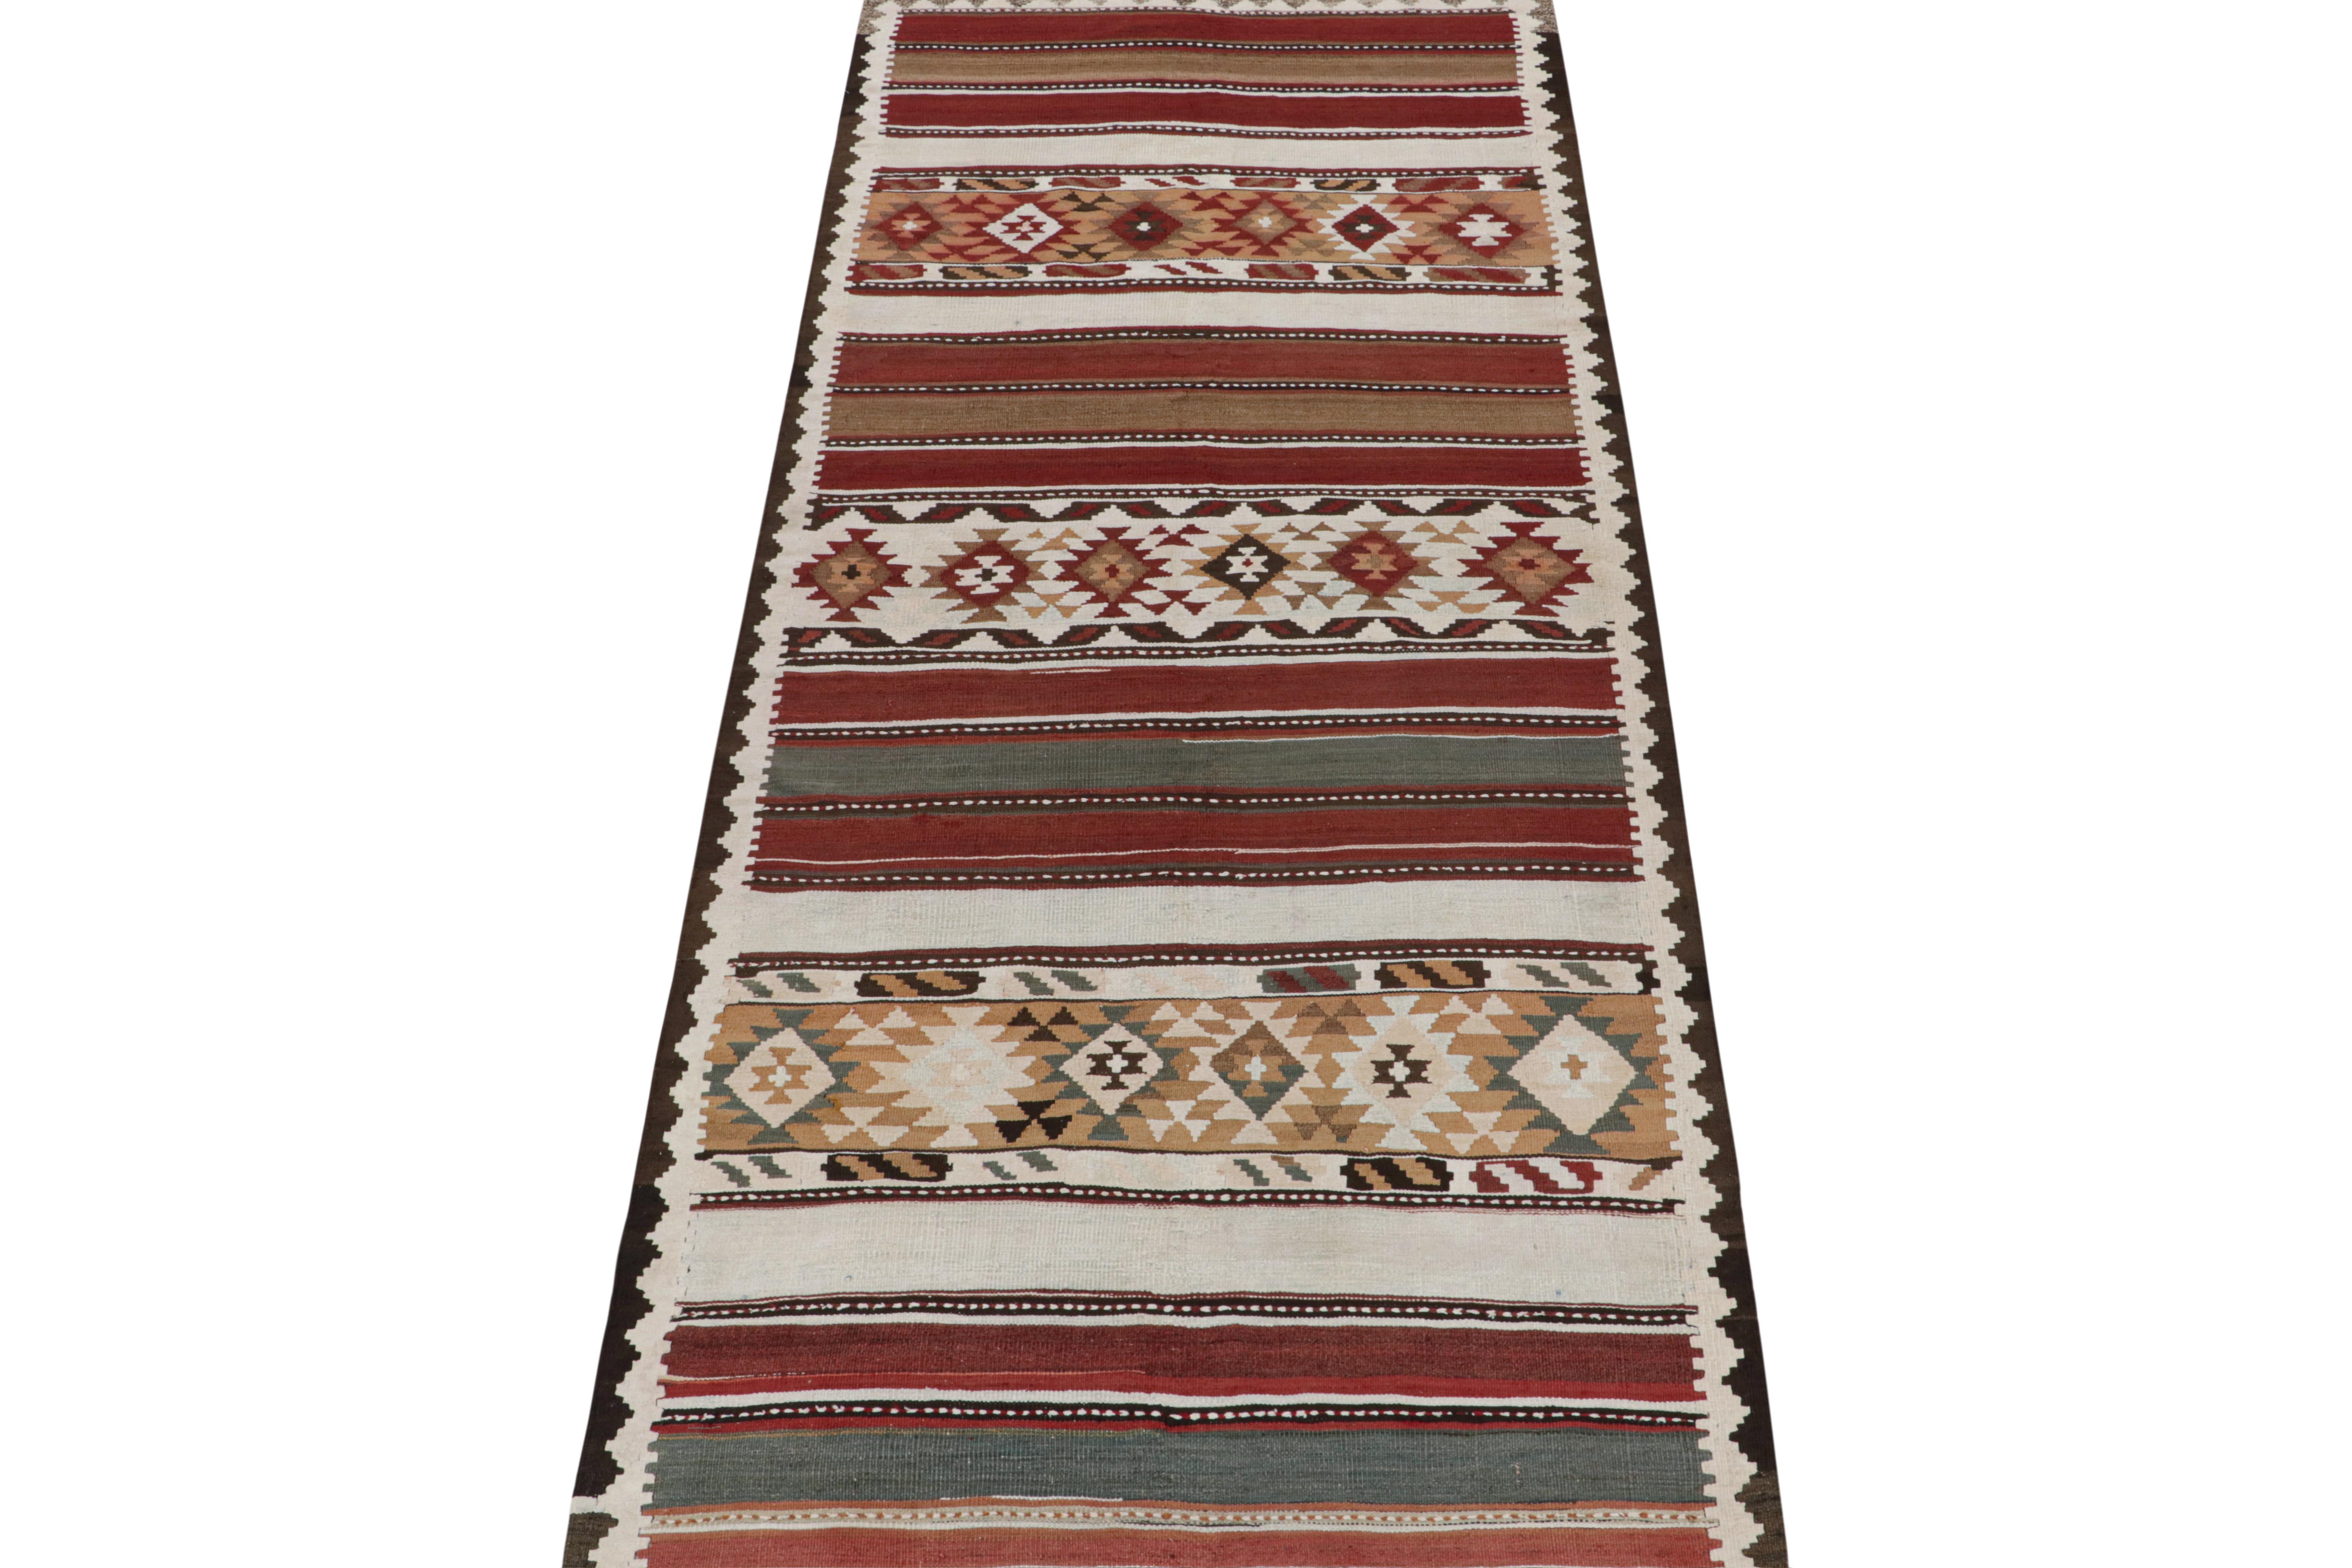 Vintage Shahsavan Persian Kilim in Red, White and Beige-Brown Geometric Patterns In Good Condition For Sale In Long Island City, NY